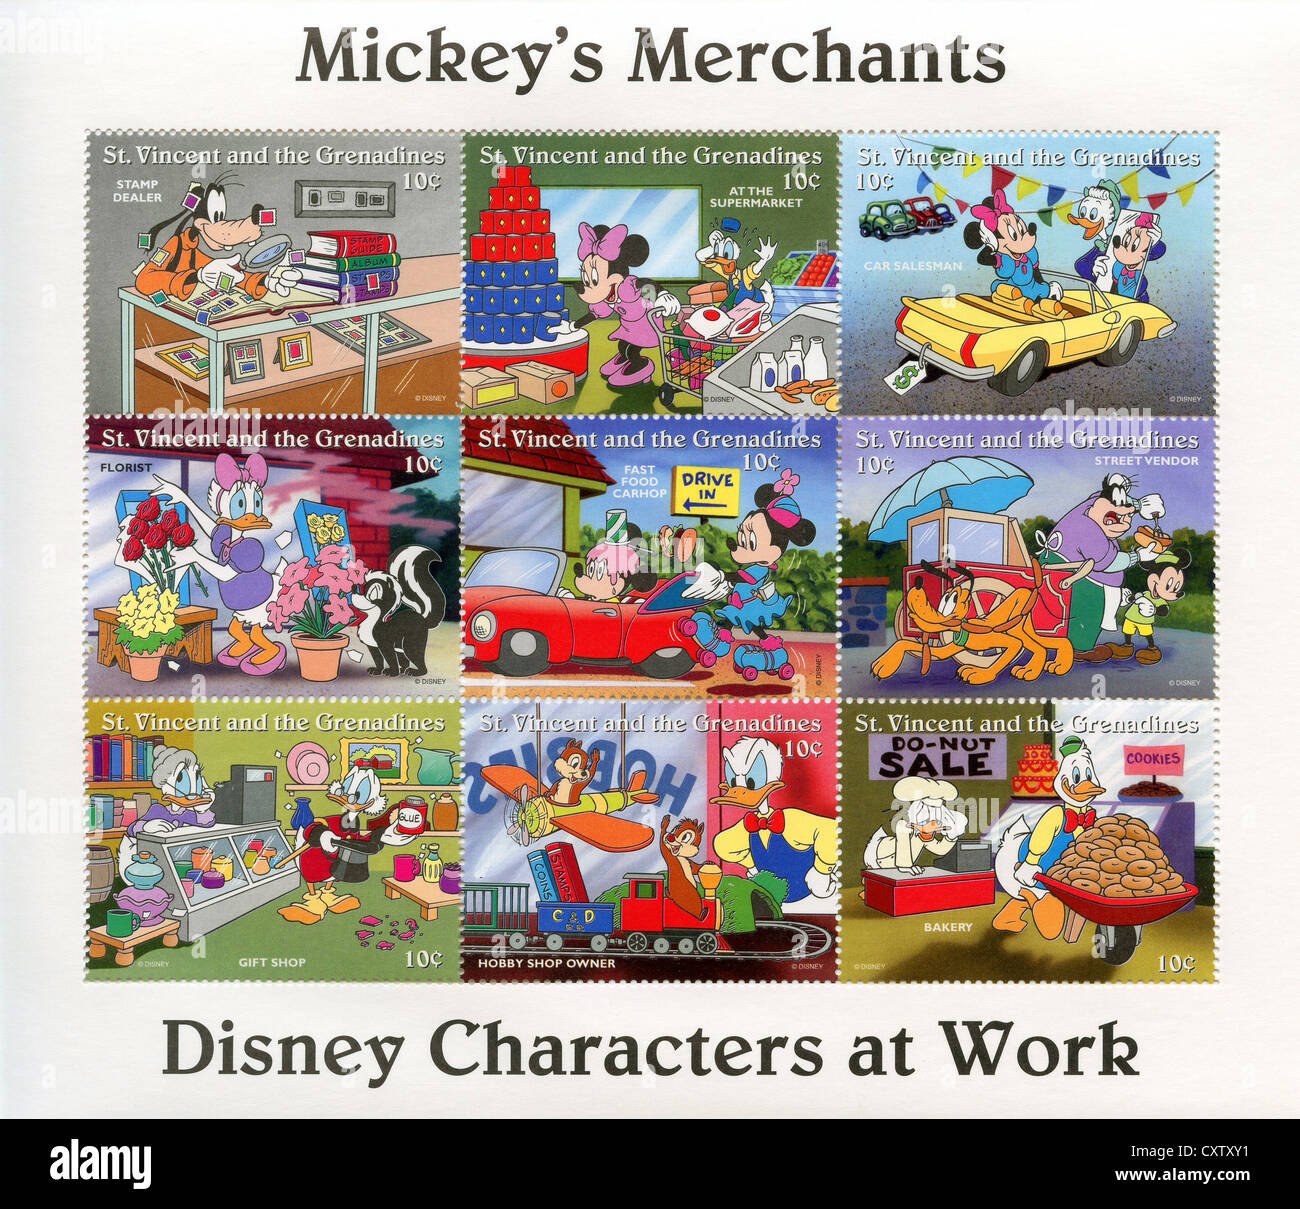 Saint Vincent and the Grenadines postage stamps - Disney cartoon characters Stock Photo